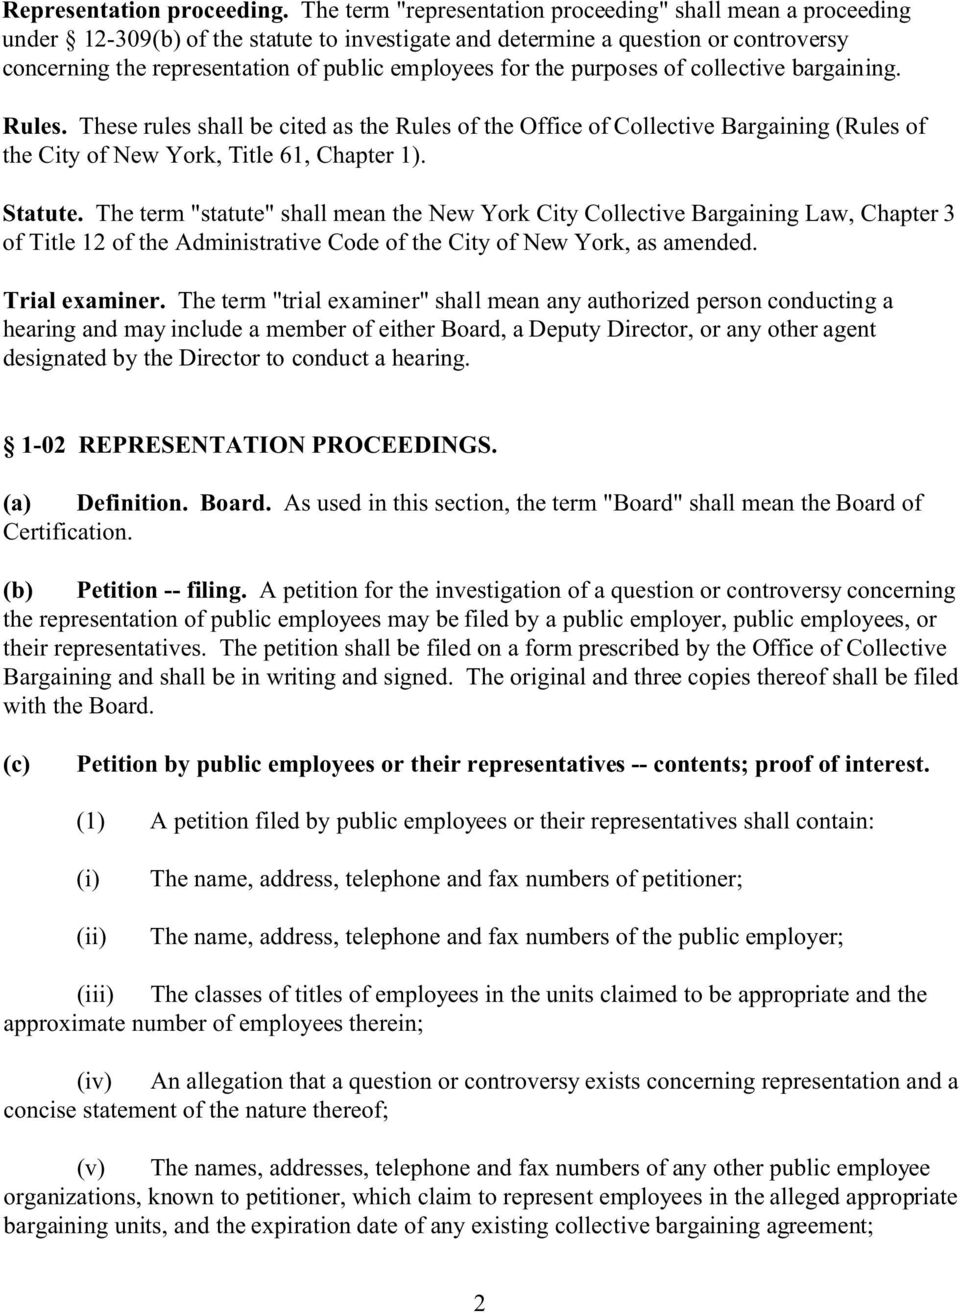 for the purposes of collective bargaining. Rules. These rules shall be cited as the Rules of the Office of Collective Bargaining (Rules of the City of New York, Title 61, Chapter 1). Statute.